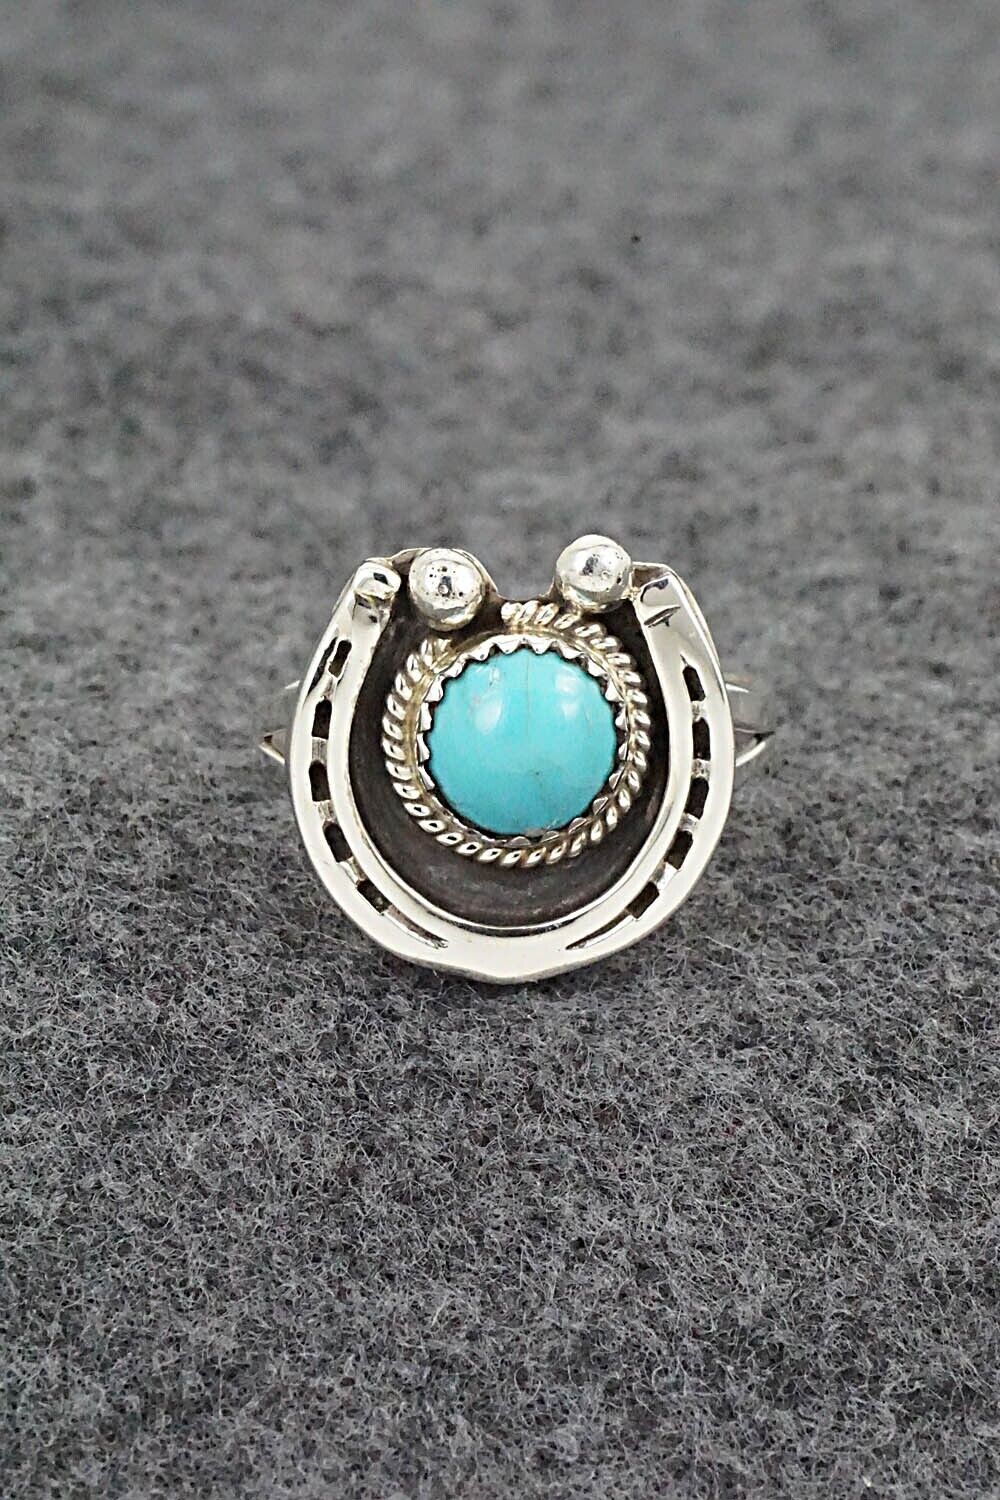 Turquoise & Sterling Silver Ring - Alice Rose Saunders - Size 9.25